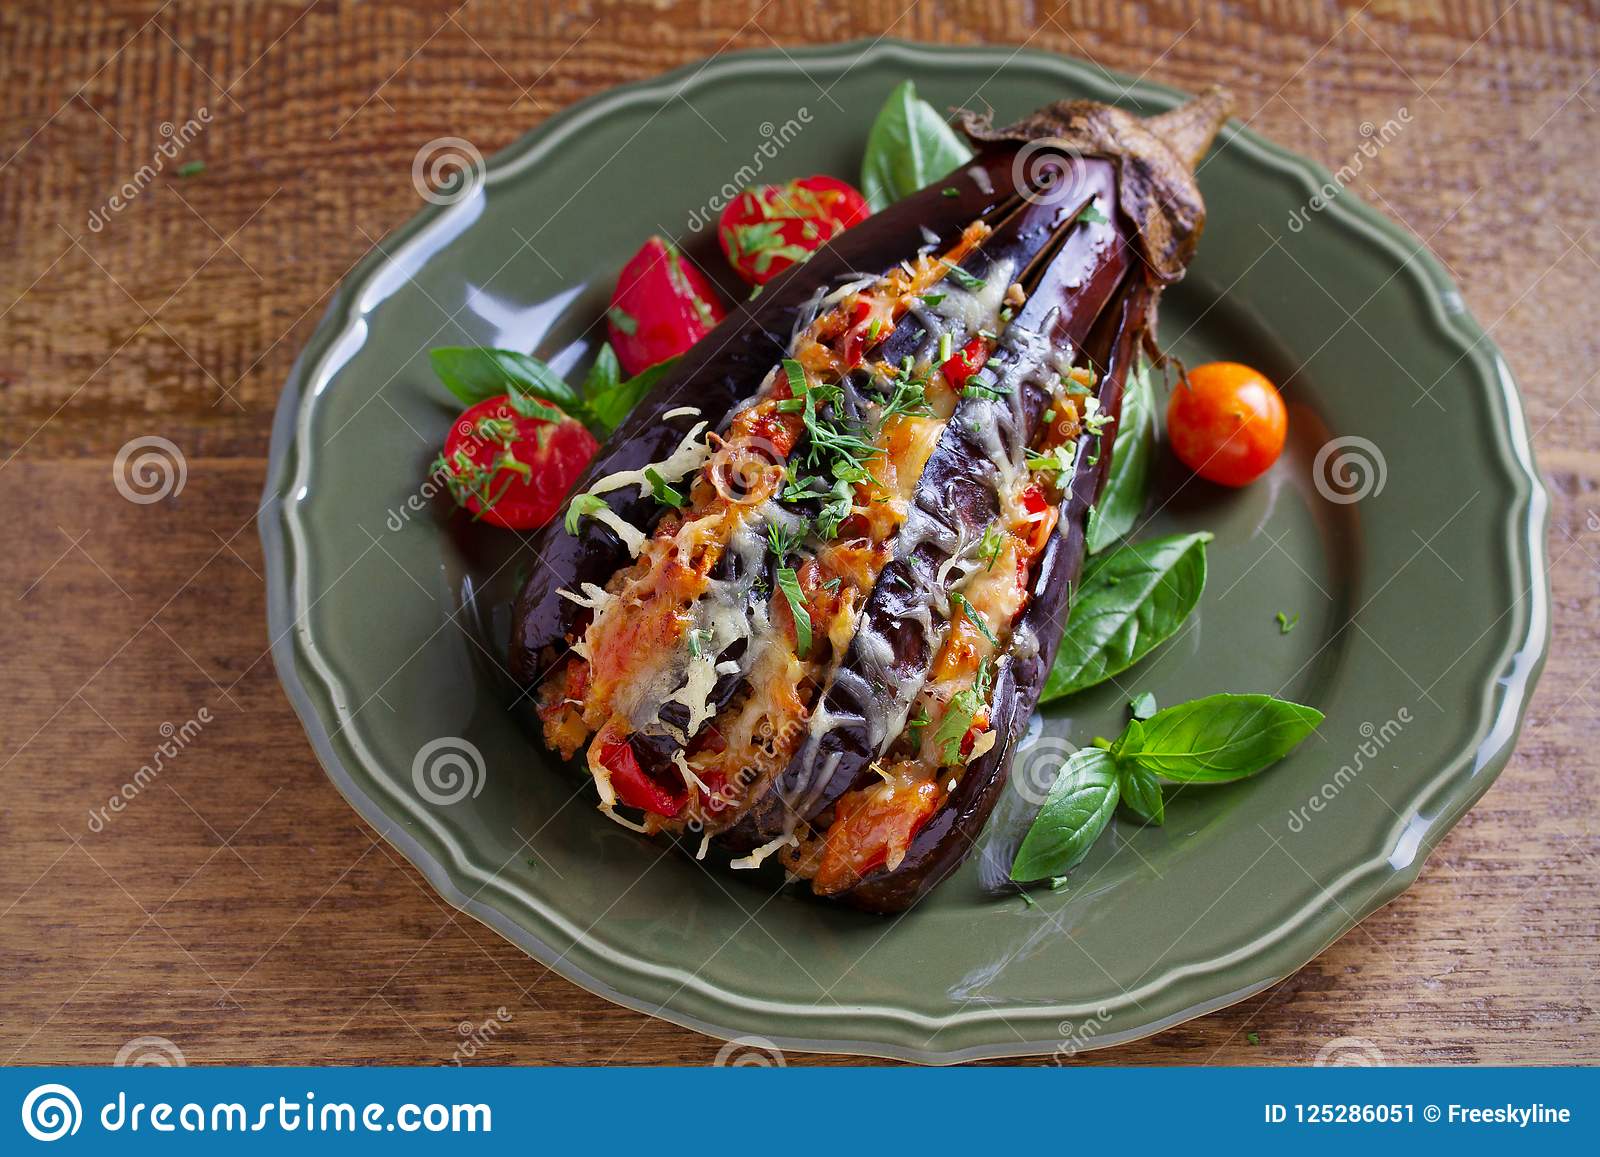 eggplant stuffed with meat